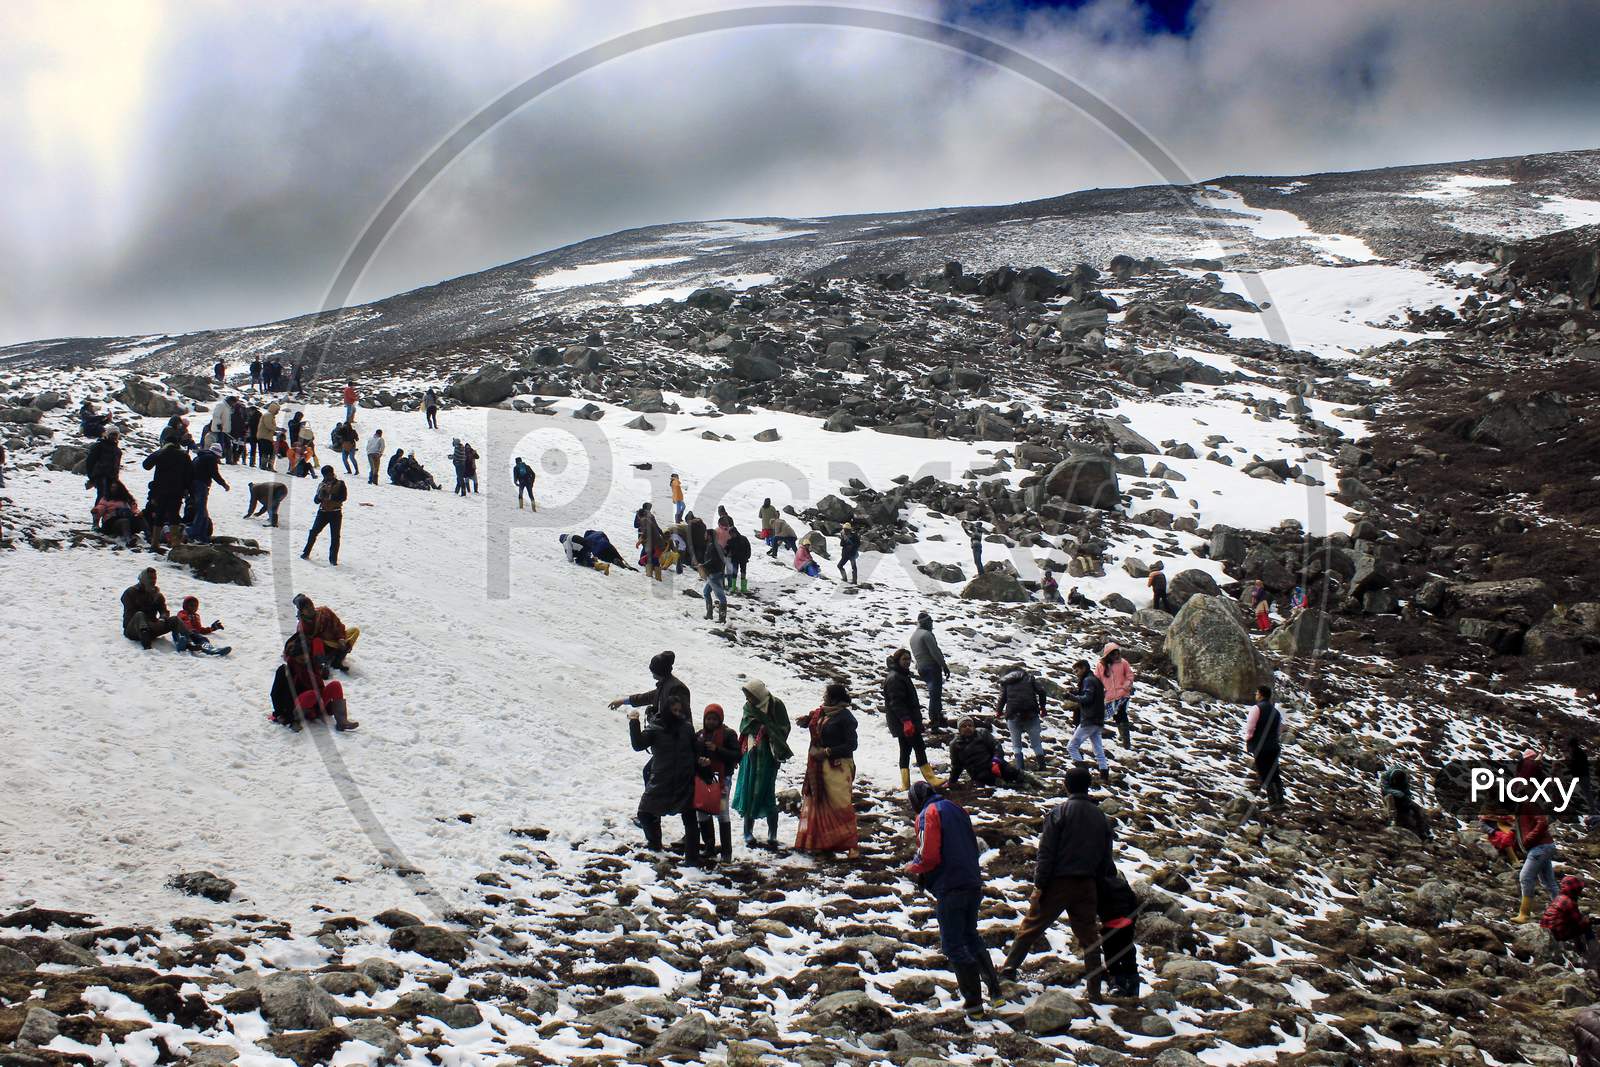 People on Snow Capped Mountain